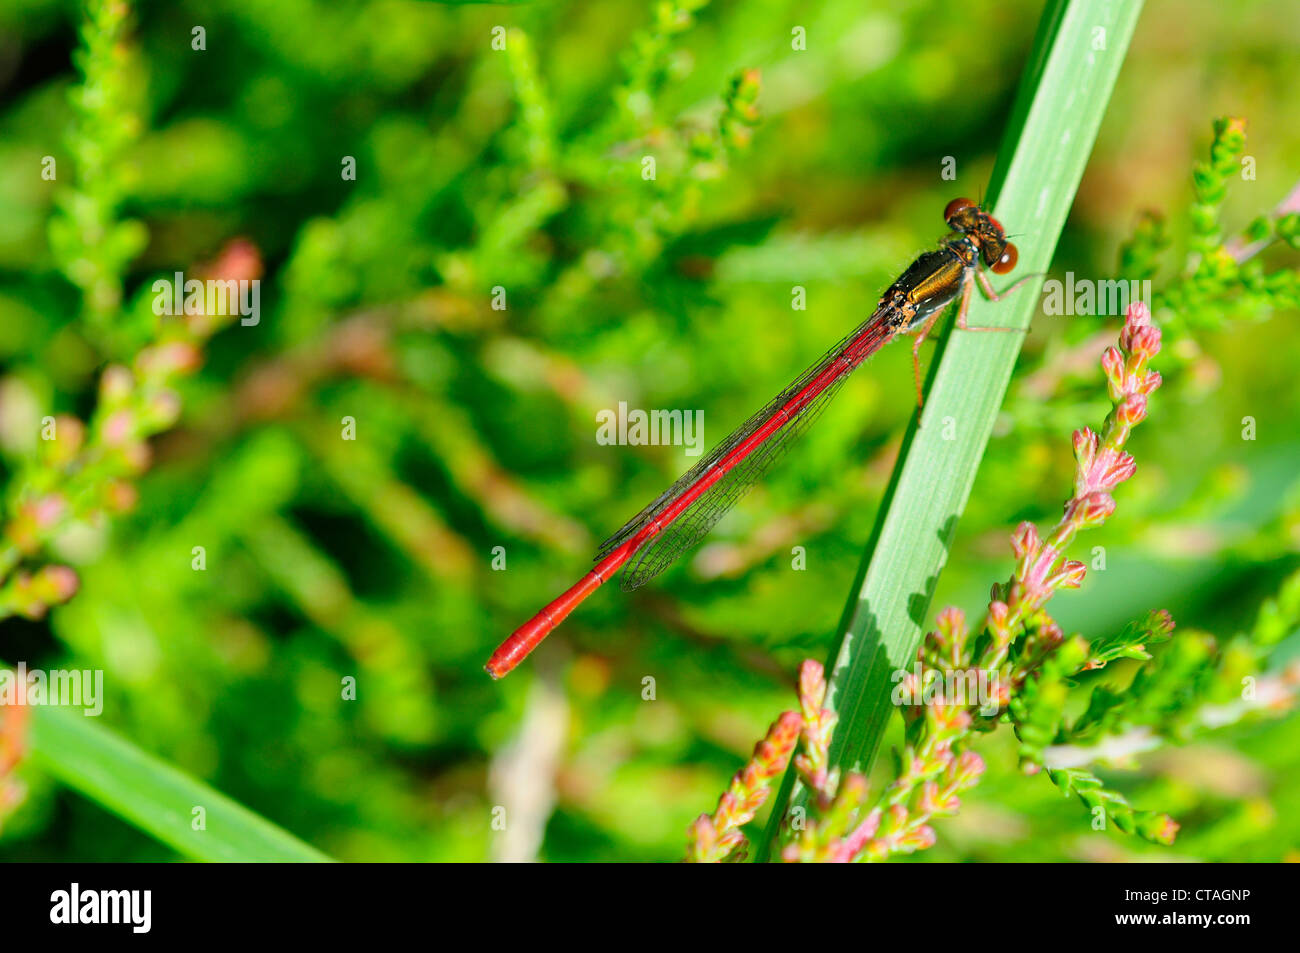 A small red damselfly on a reed UK Stock Photo